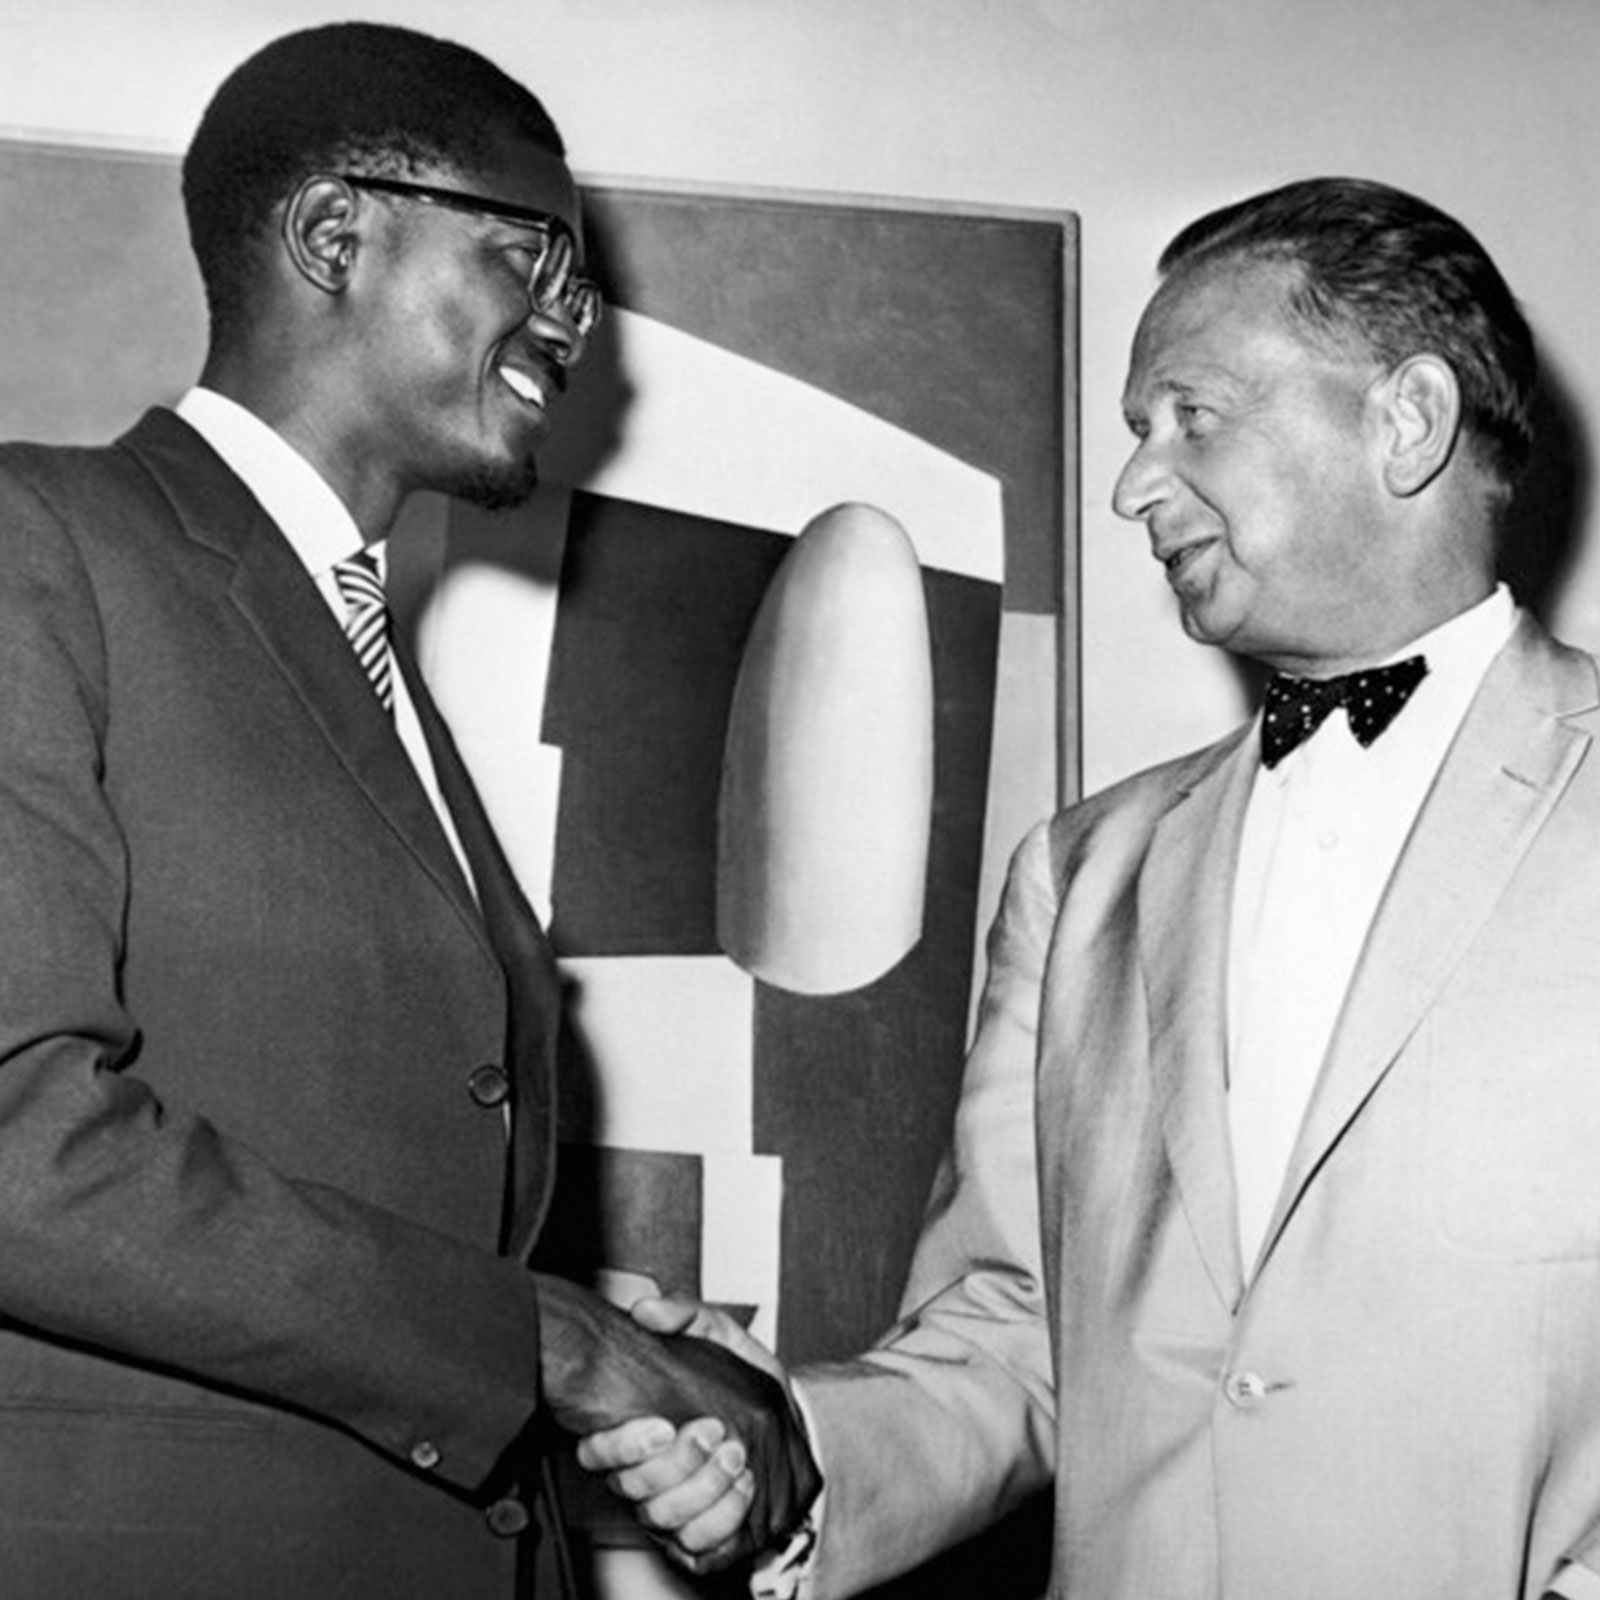 Congo Prime Minister Patrice Lumumba, left, shakes hands with United Nations Secretary-General Dag Hammarskjold, after their conference at the United Nations, N.Y., United States, on July 24, 1960. 